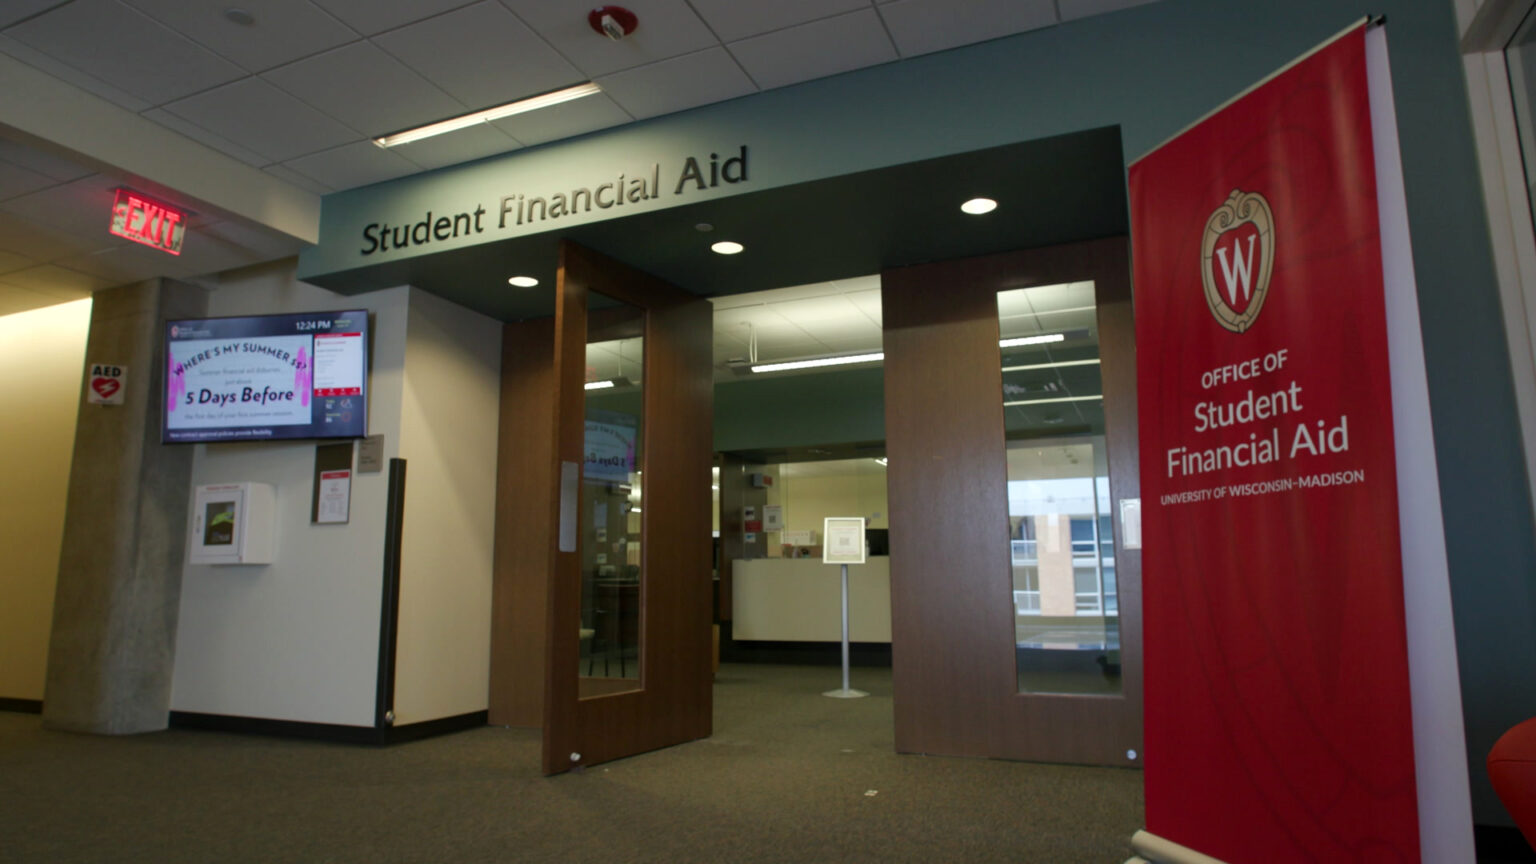 A vinyl banner with words Office of Student Financial Aid and University of Wisconsin-Madison with the university's 'W' crest on it stands in a hallway, next to glass-paneled door under a word sign reading Student Financial Aid.